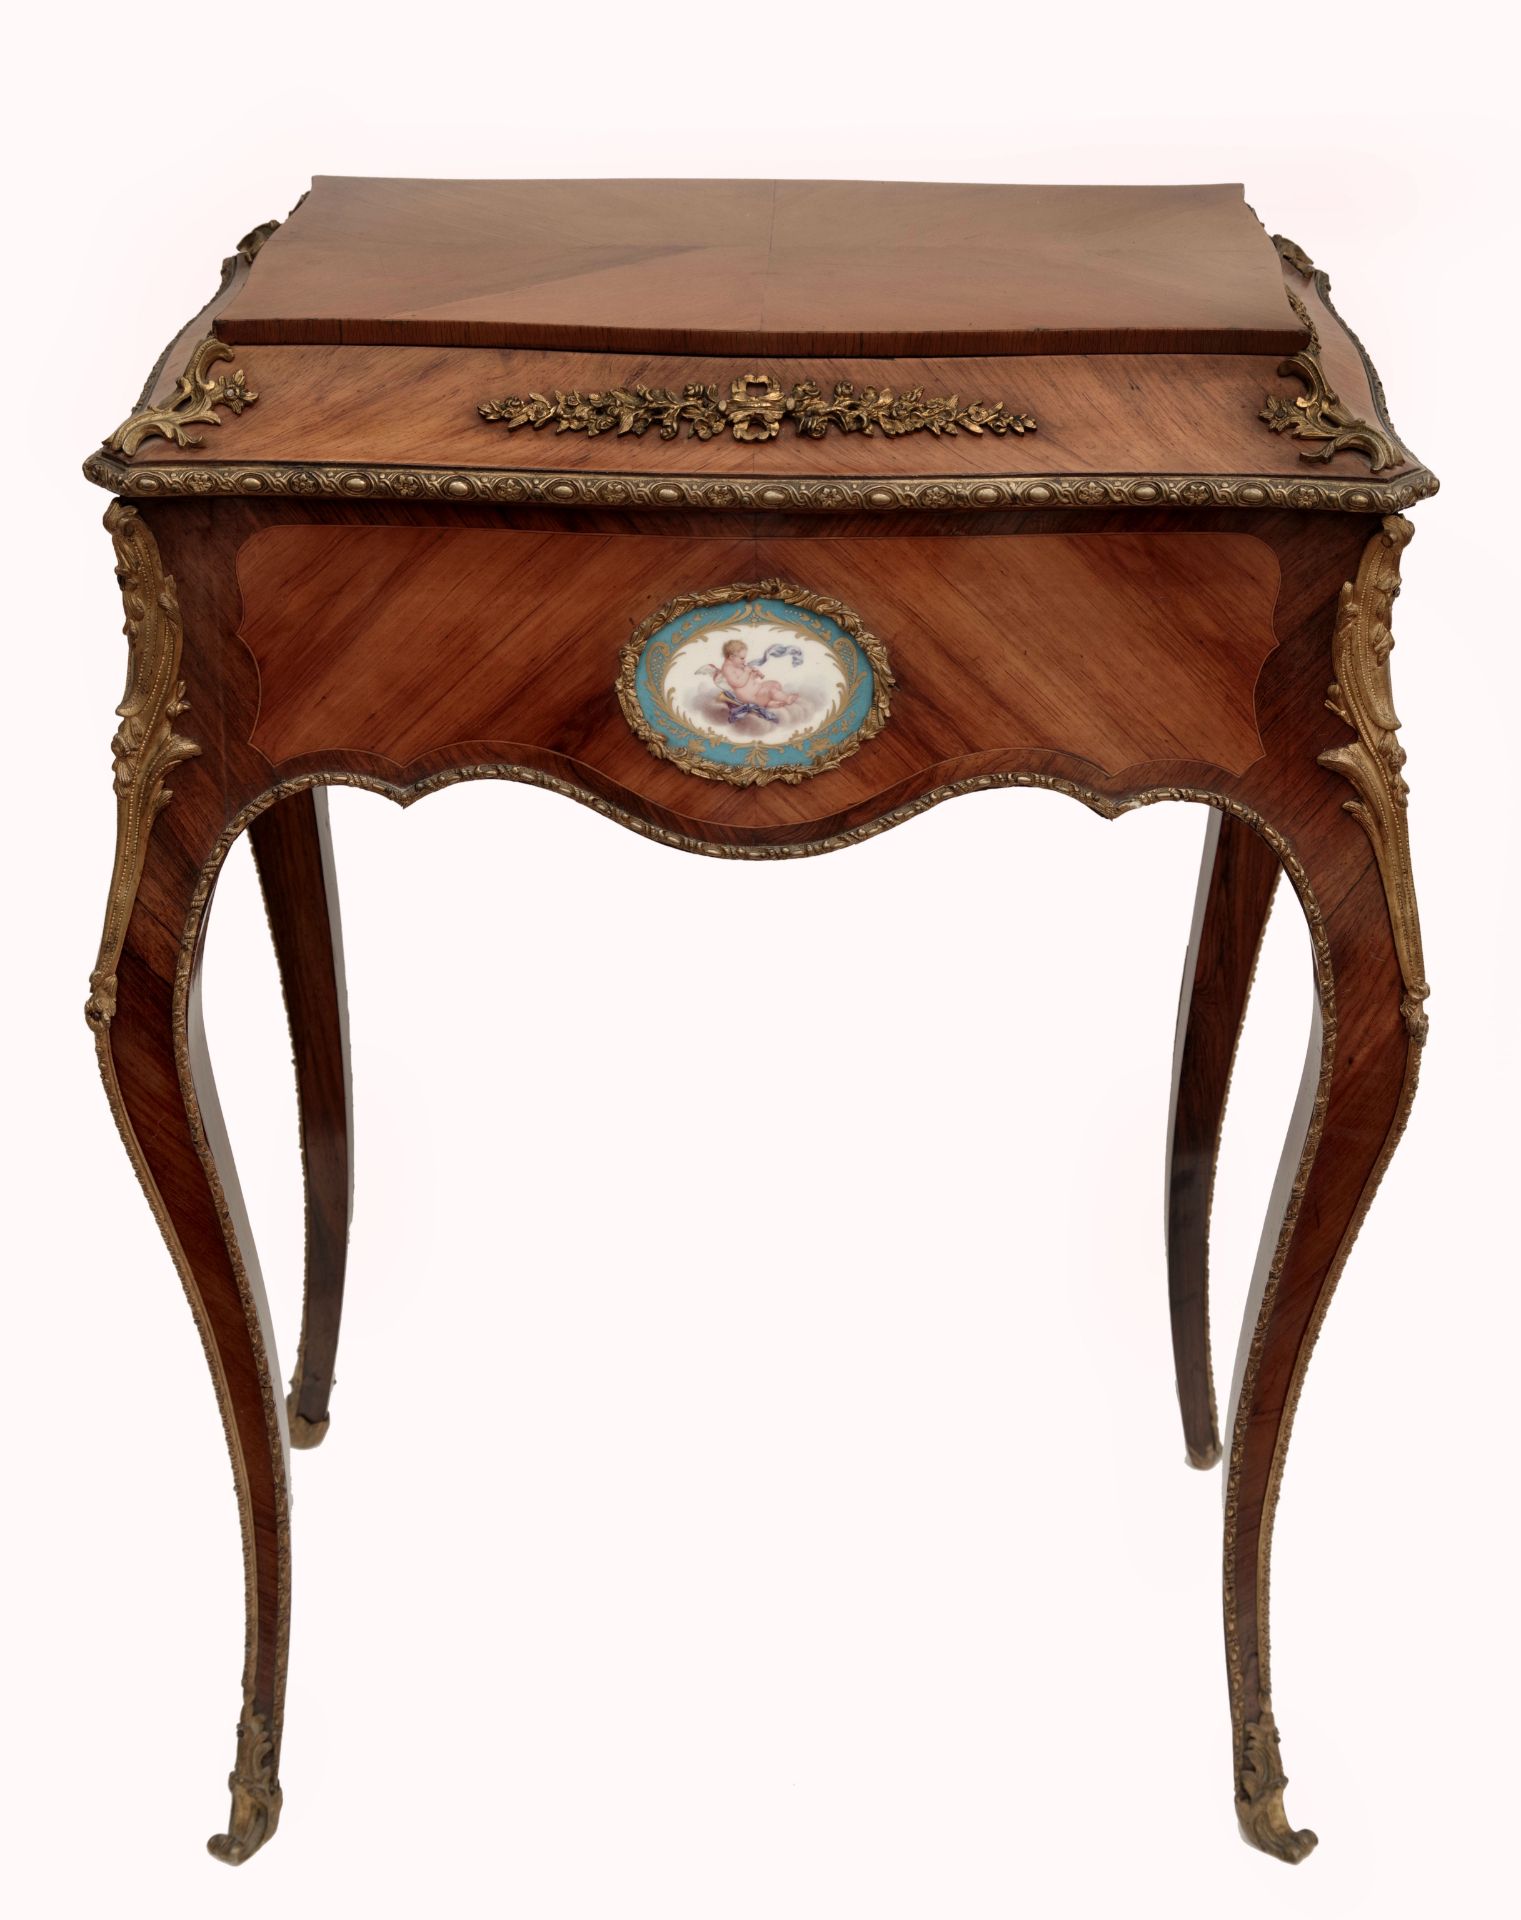 A Louis XV Ormolu-Mounted Side Table - Image 2 of 2